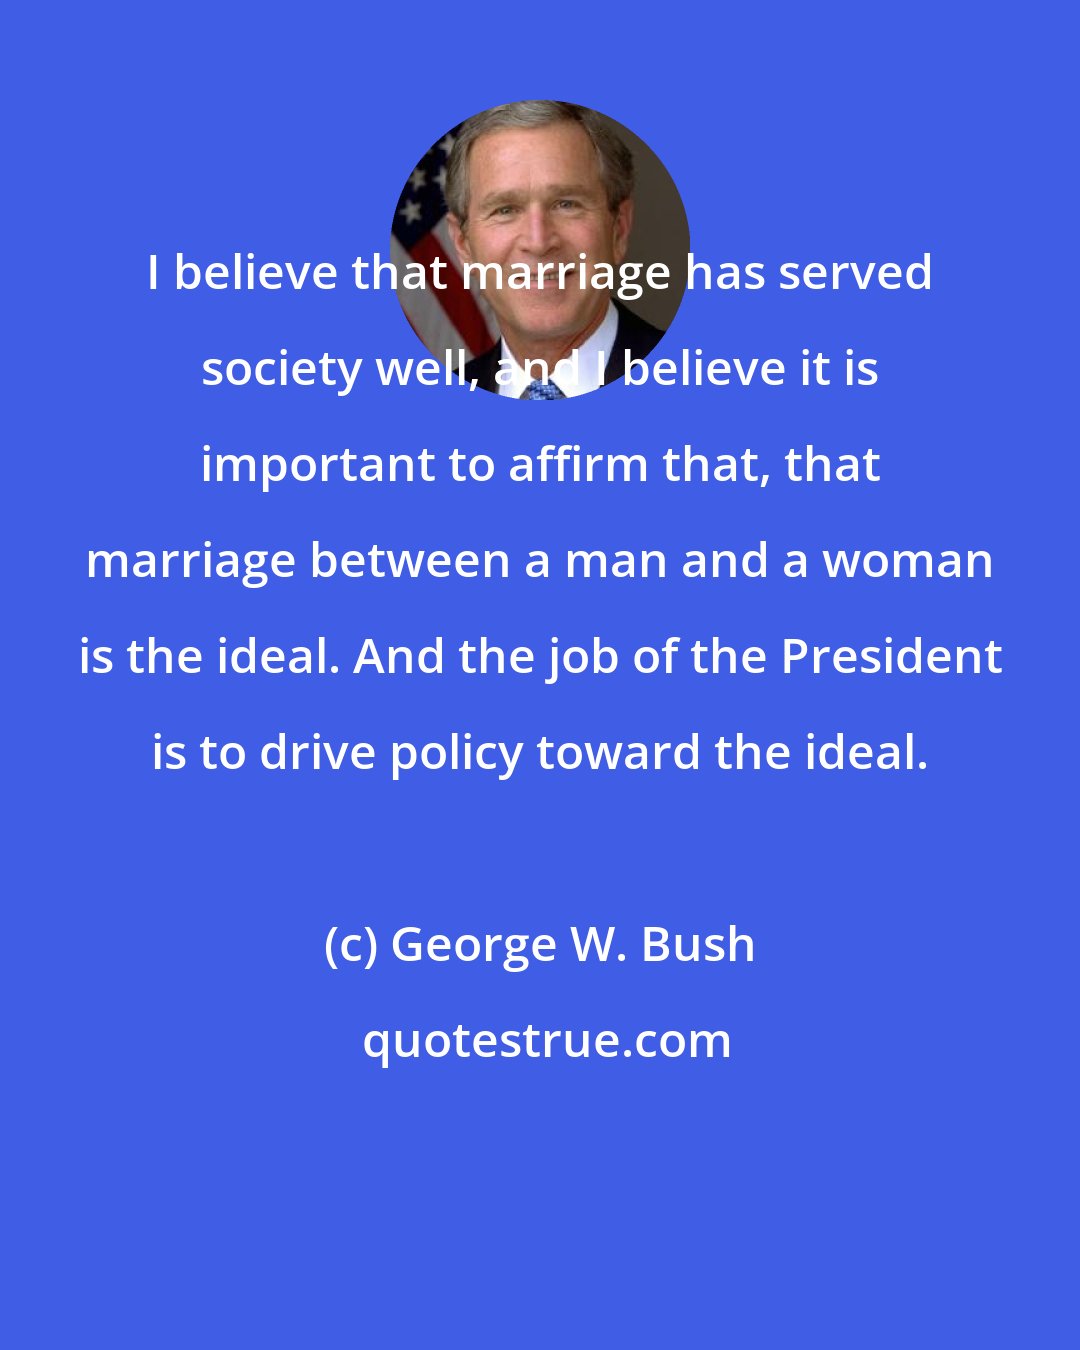 George W. Bush: I believe that marriage has served society well, and I believe it is important to affirm that, that marriage between a man and a woman is the ideal. And the job of the President is to drive policy toward the ideal.